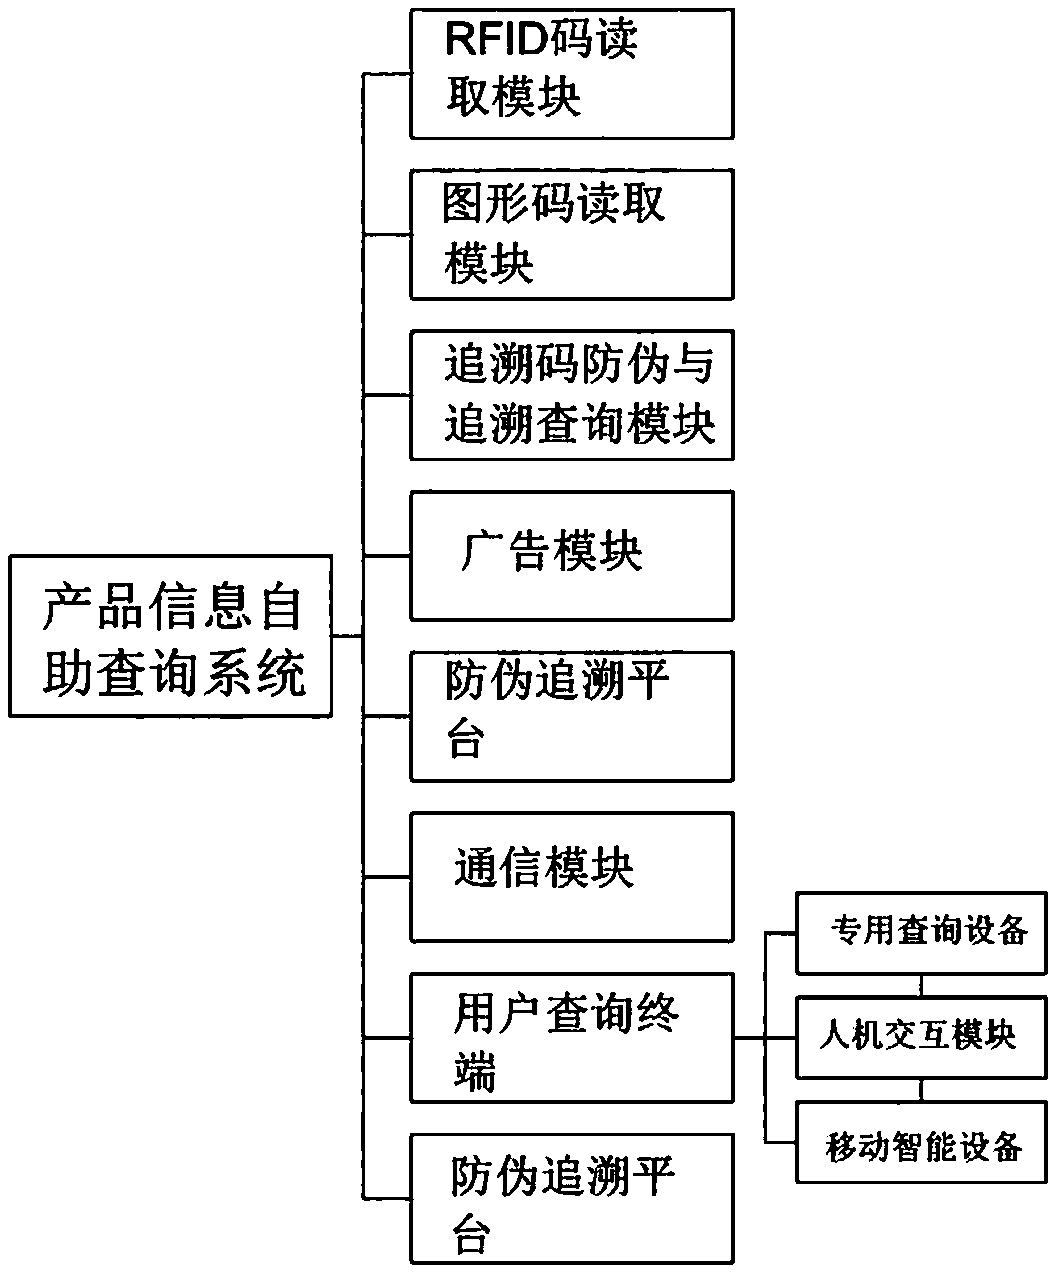 Product information self-service query system and method